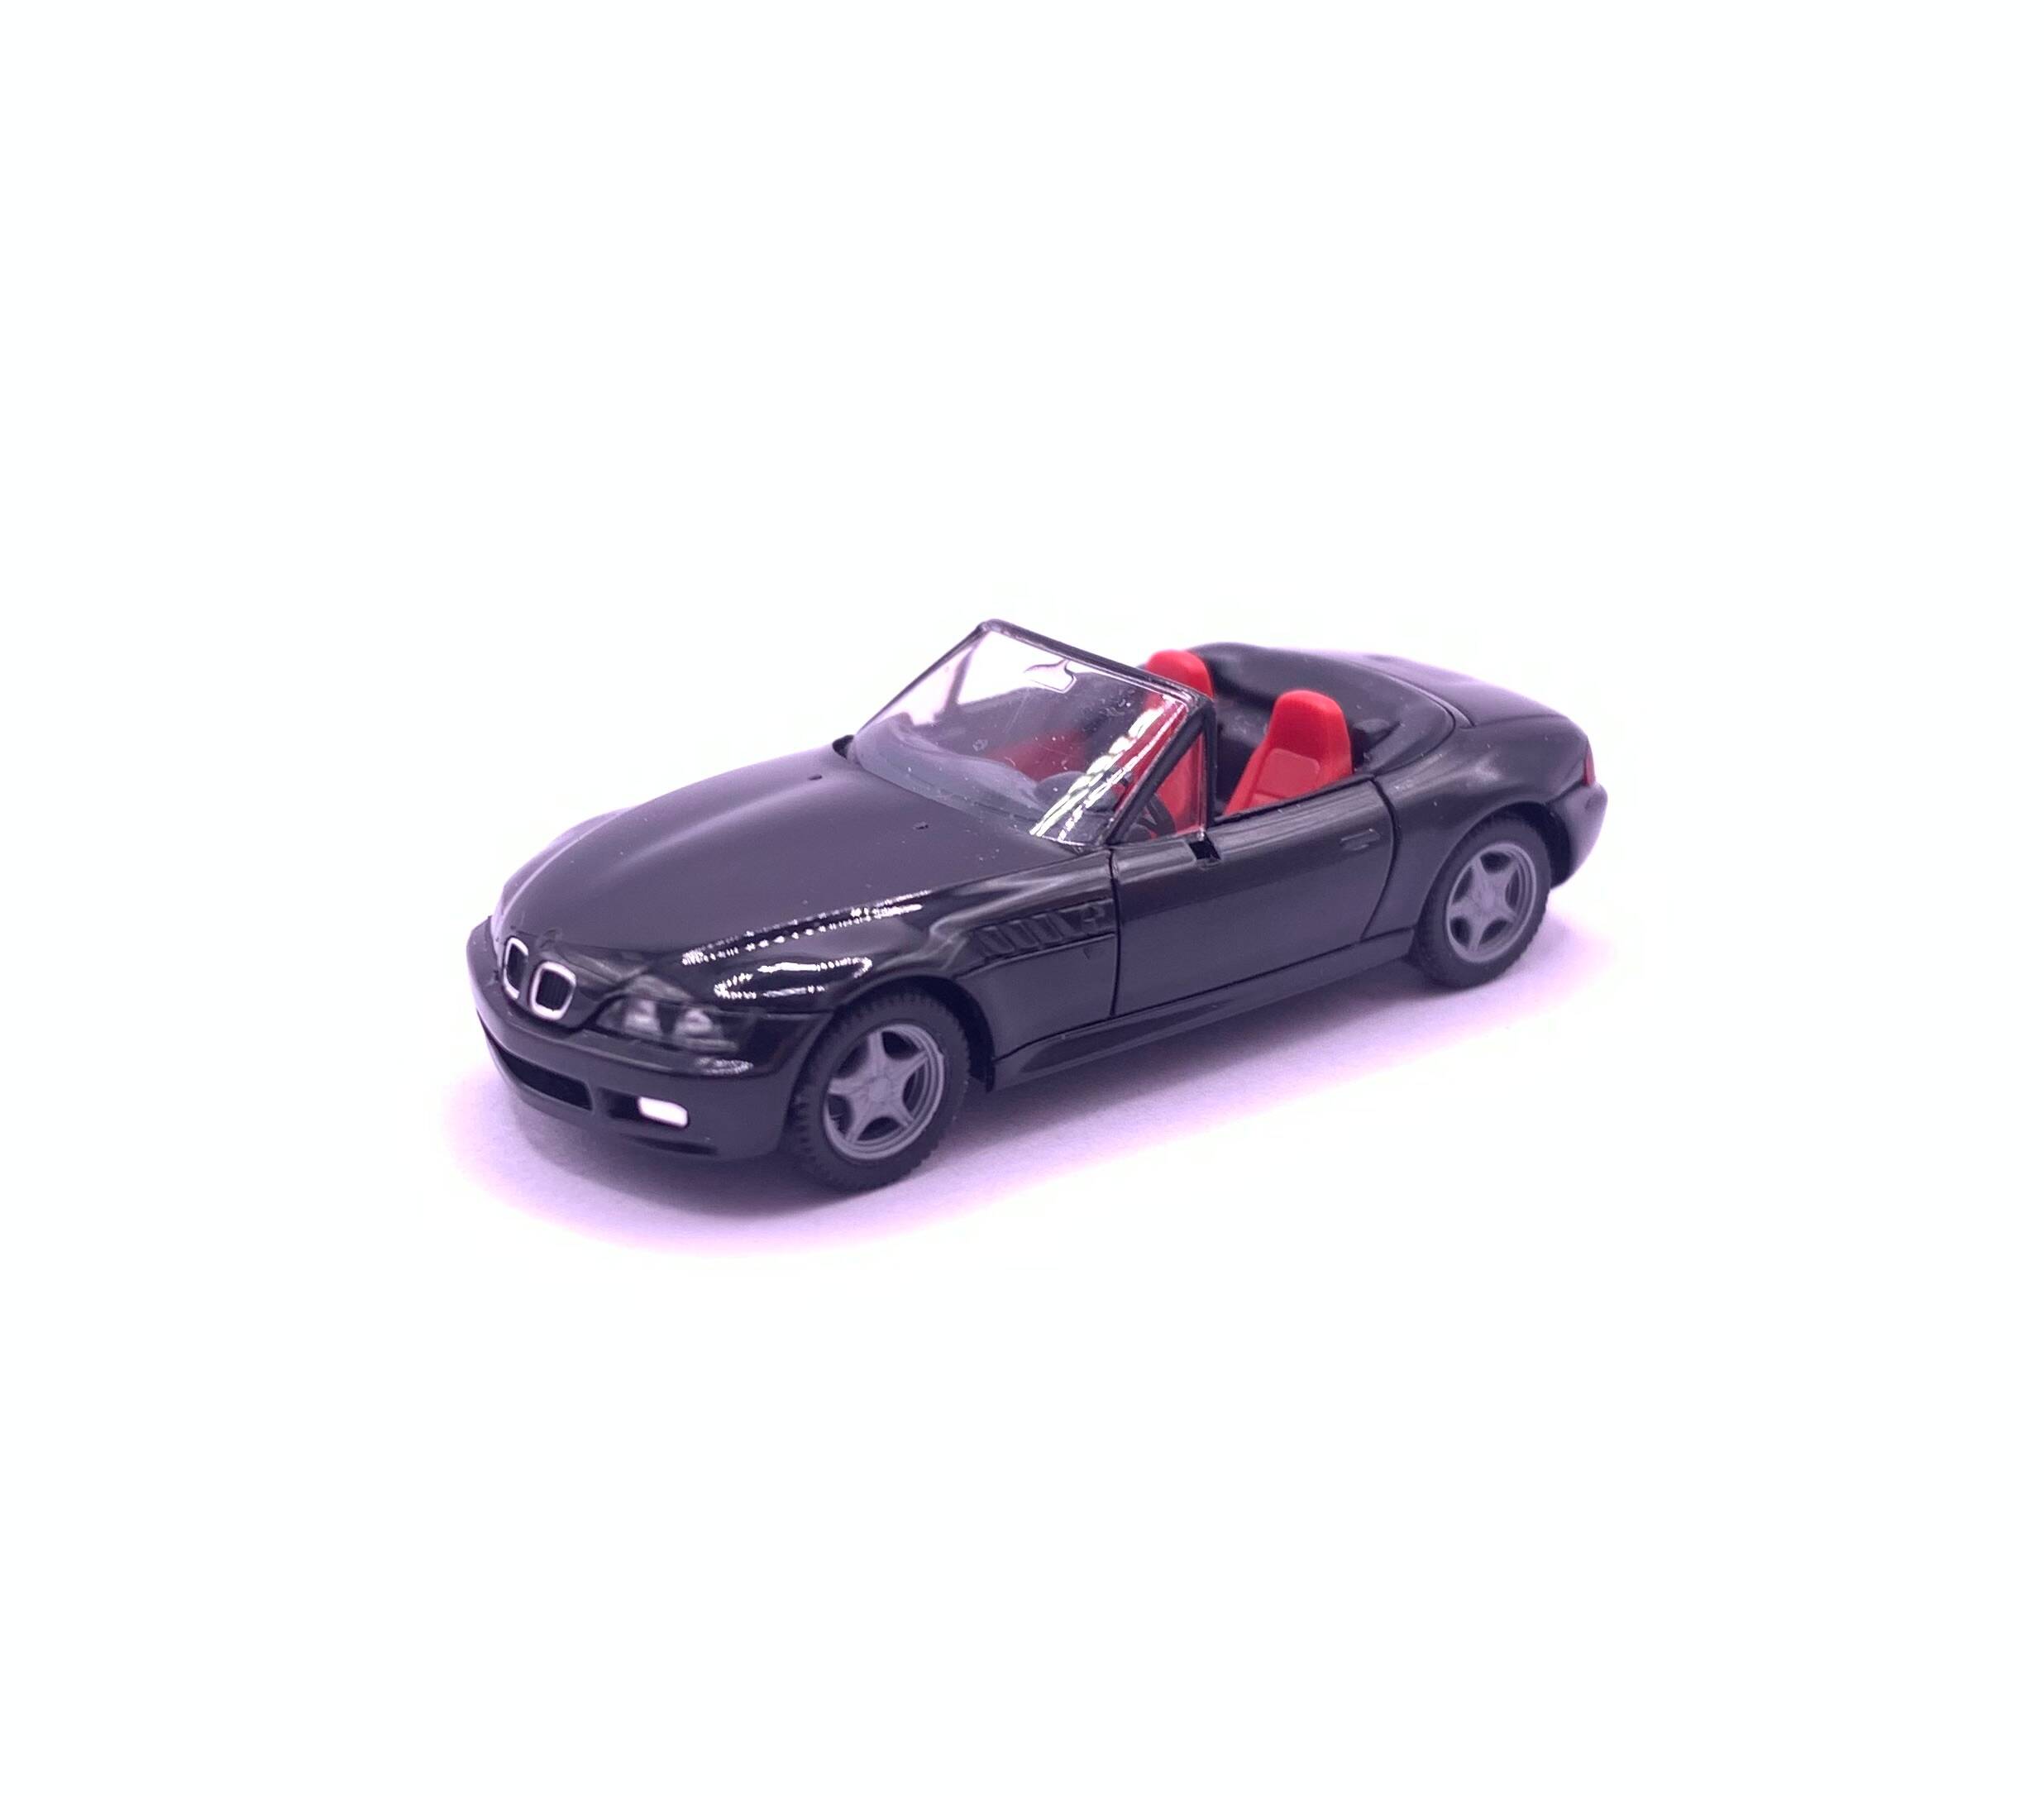 BMW Diecast and Resin Scale Models